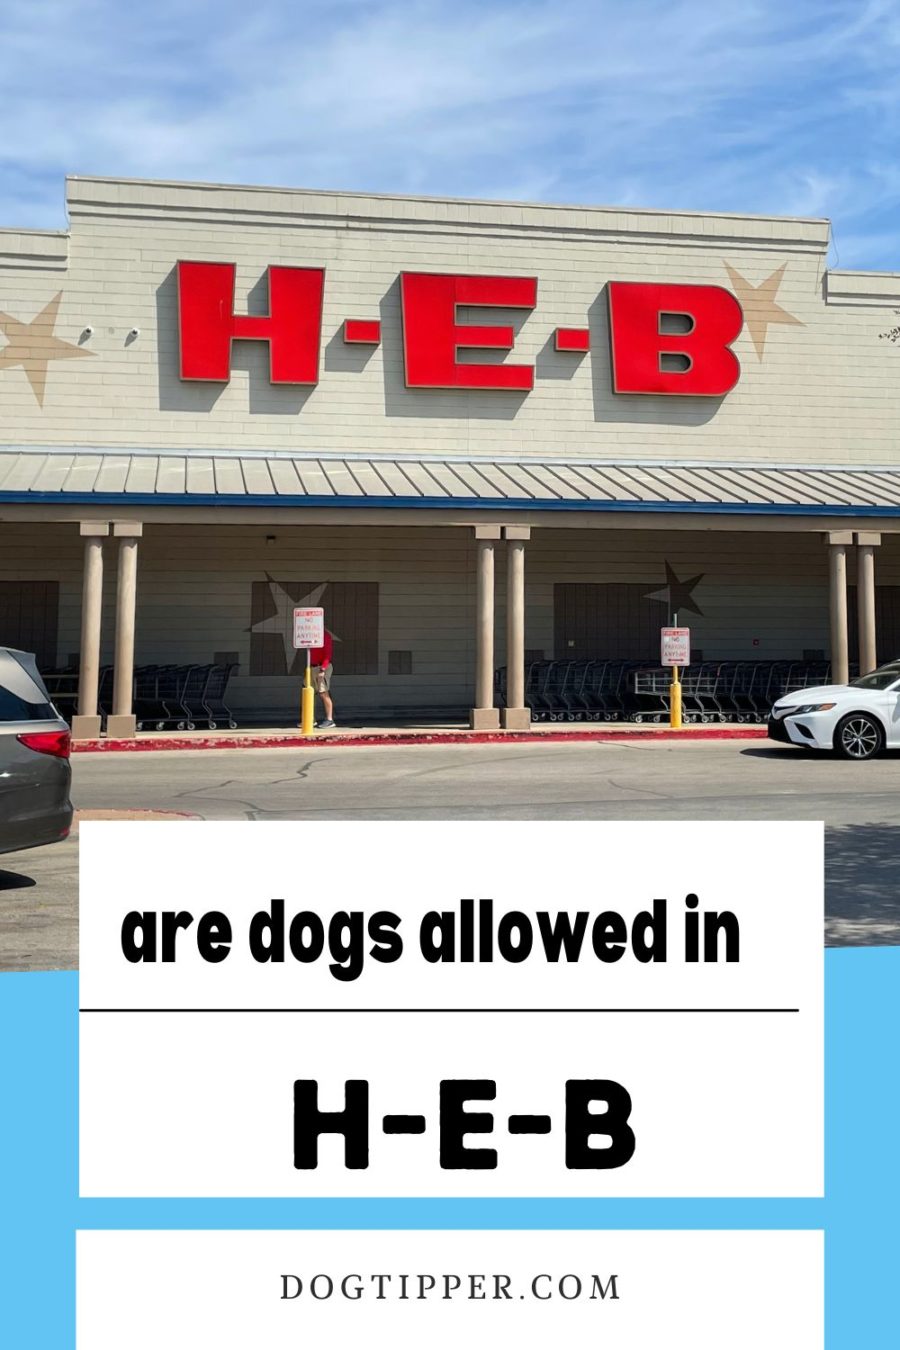 Are dogs allowed in HEB stores?